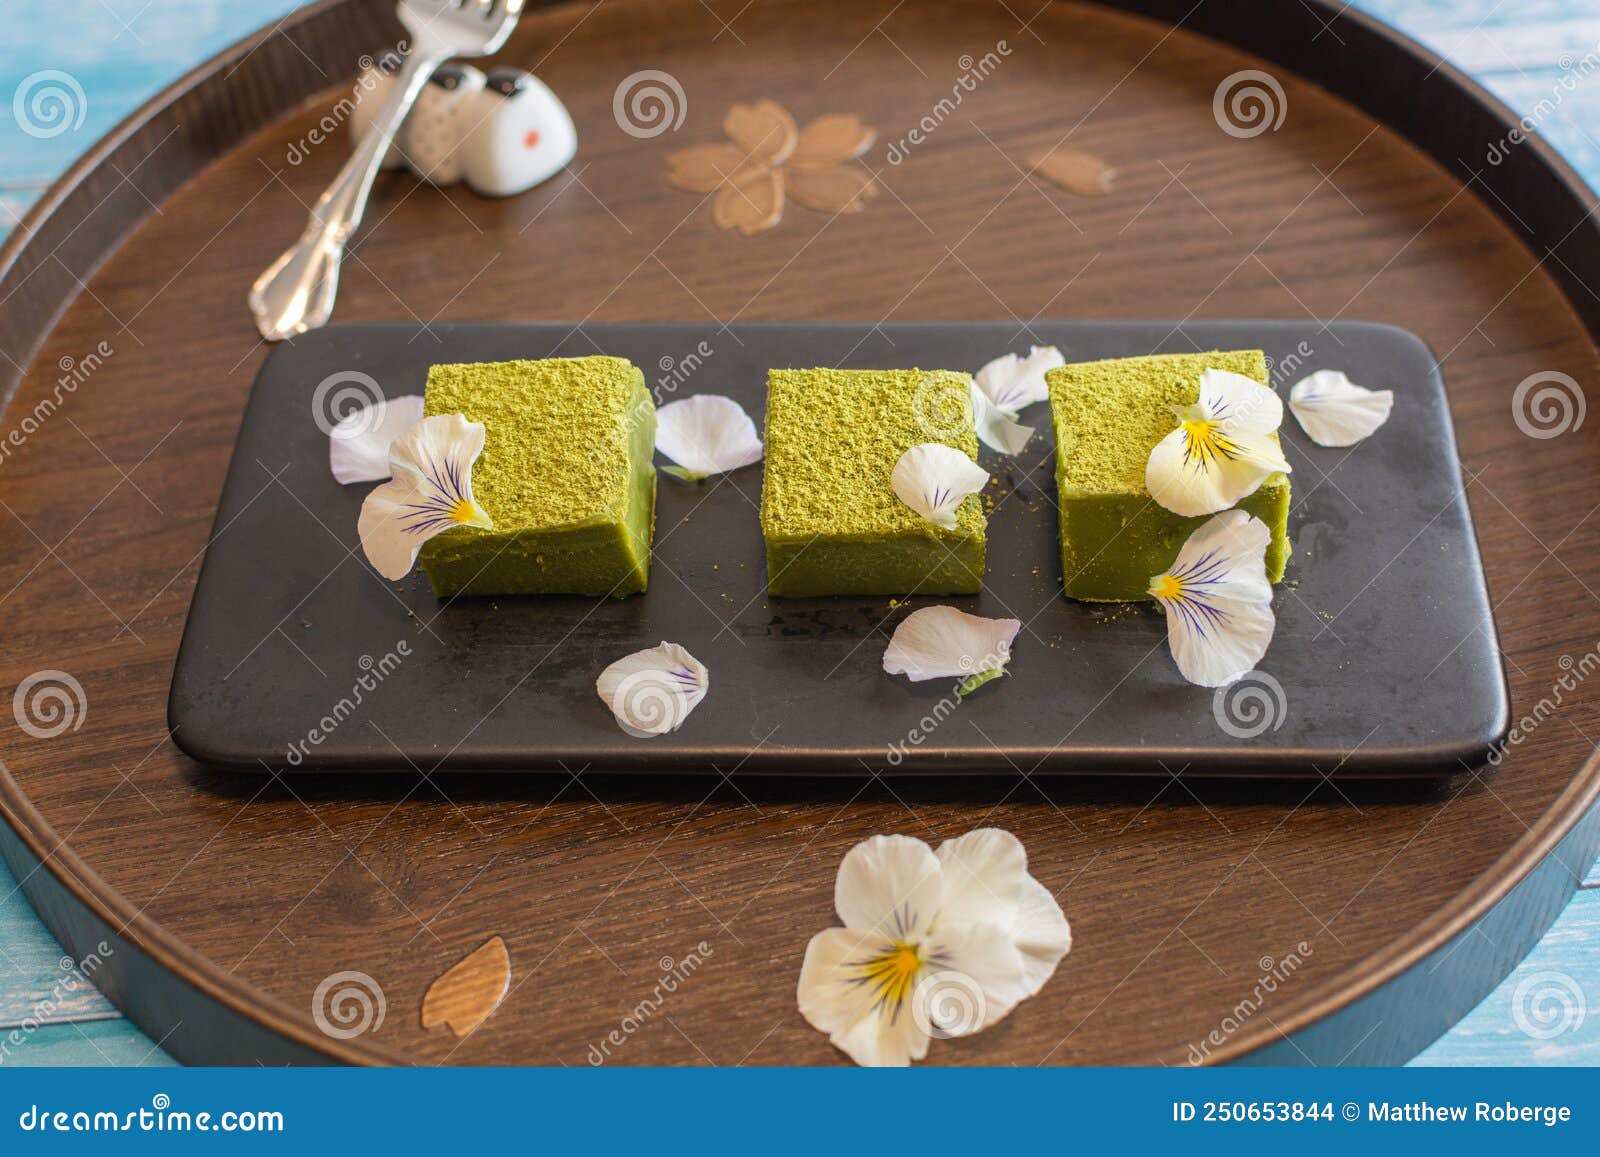 nama matcha chocolate with edible flowers on a traditional wooden tray